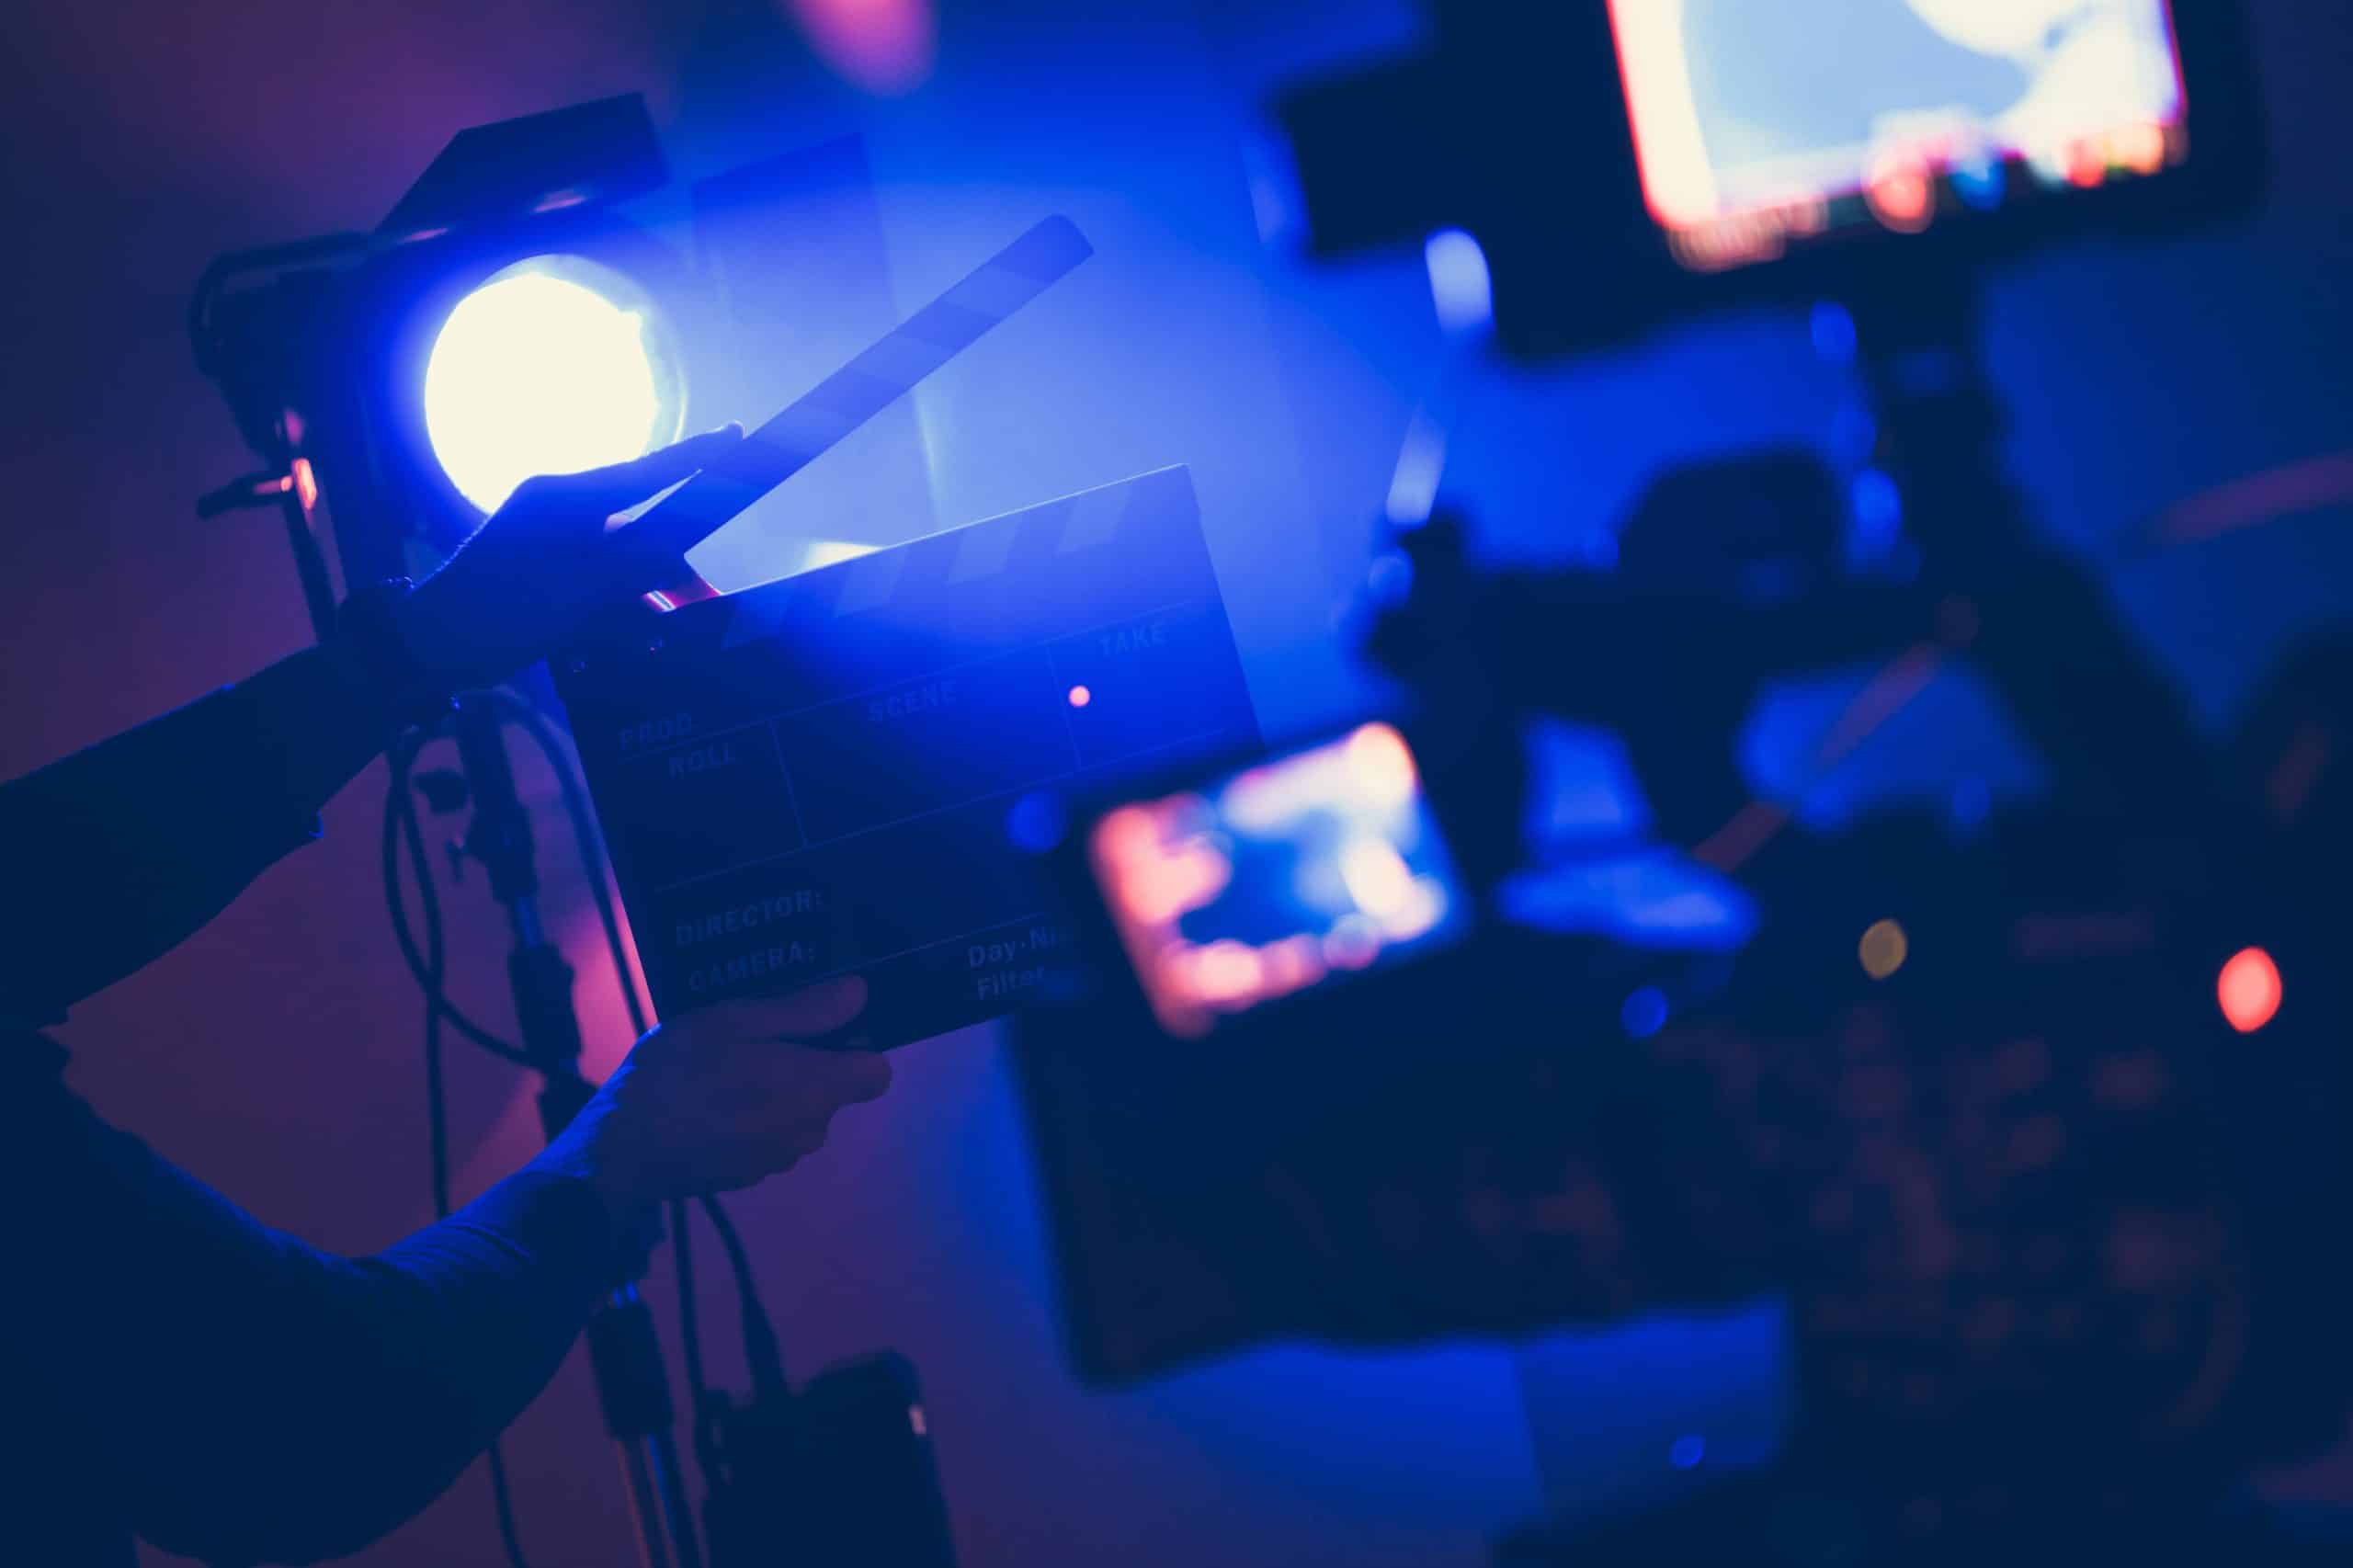 The skills you need for digital filmmaking